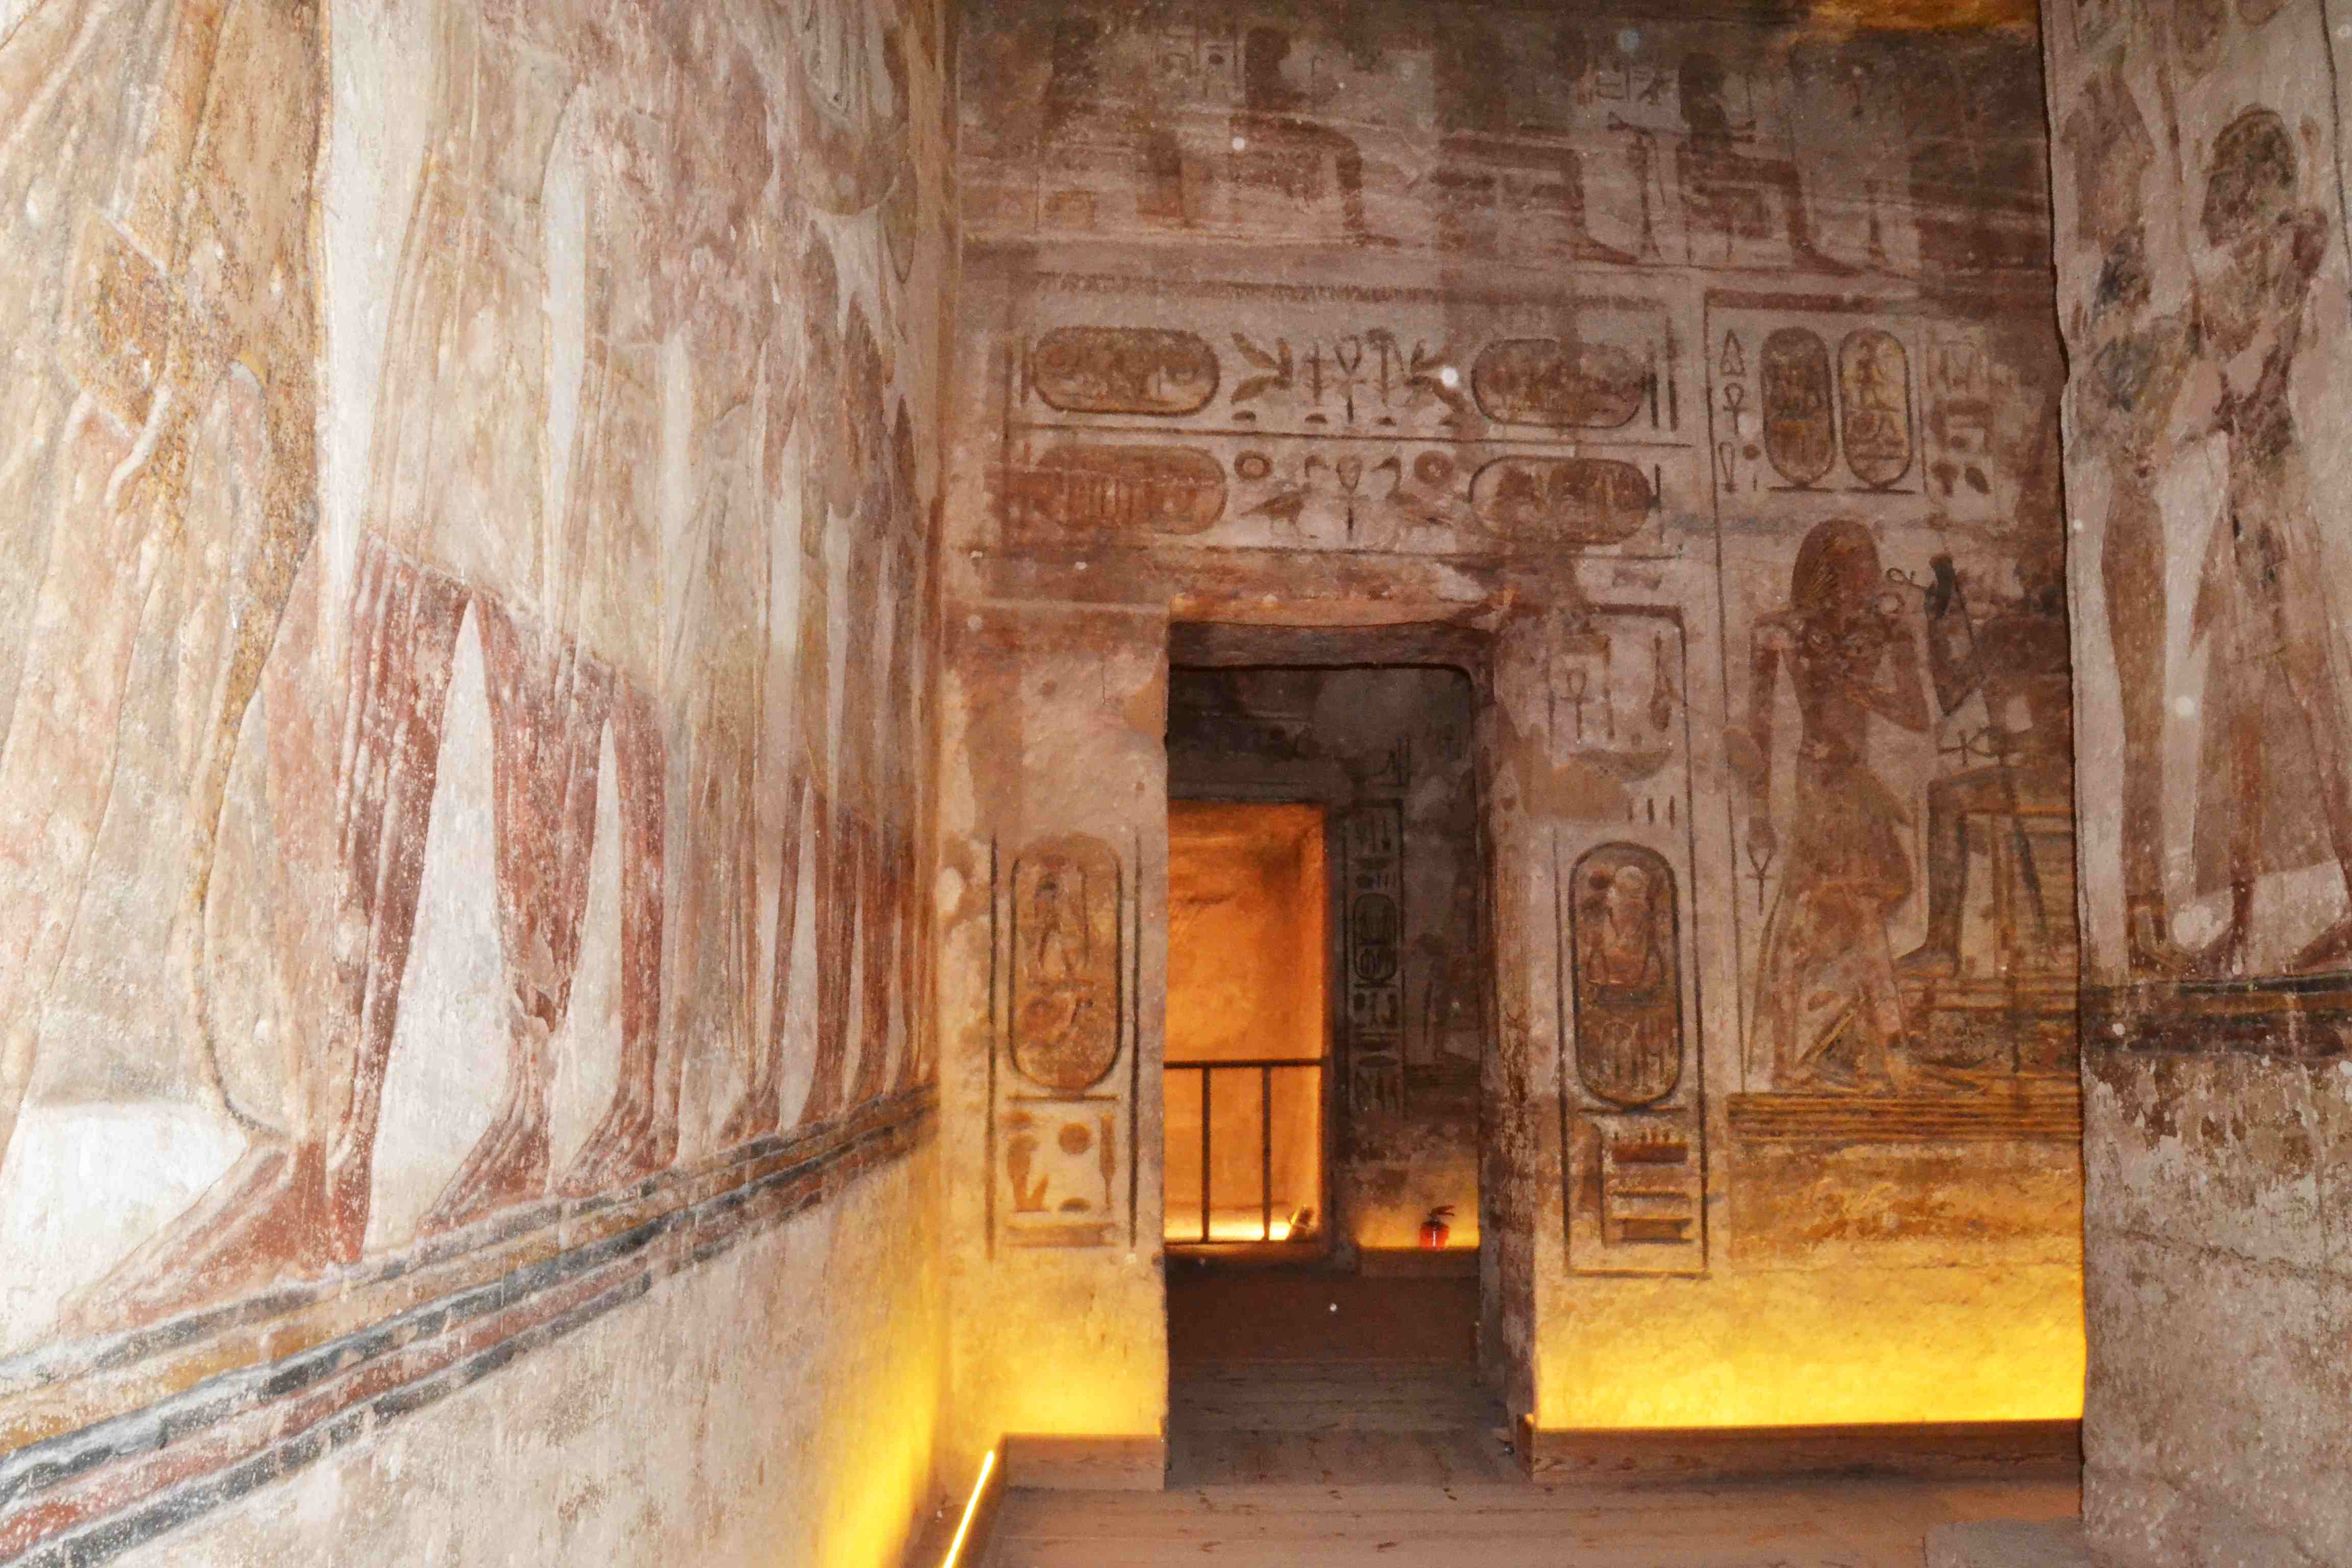 Hieroglyphics decorating one of the chambers in the great temple of Ramses II